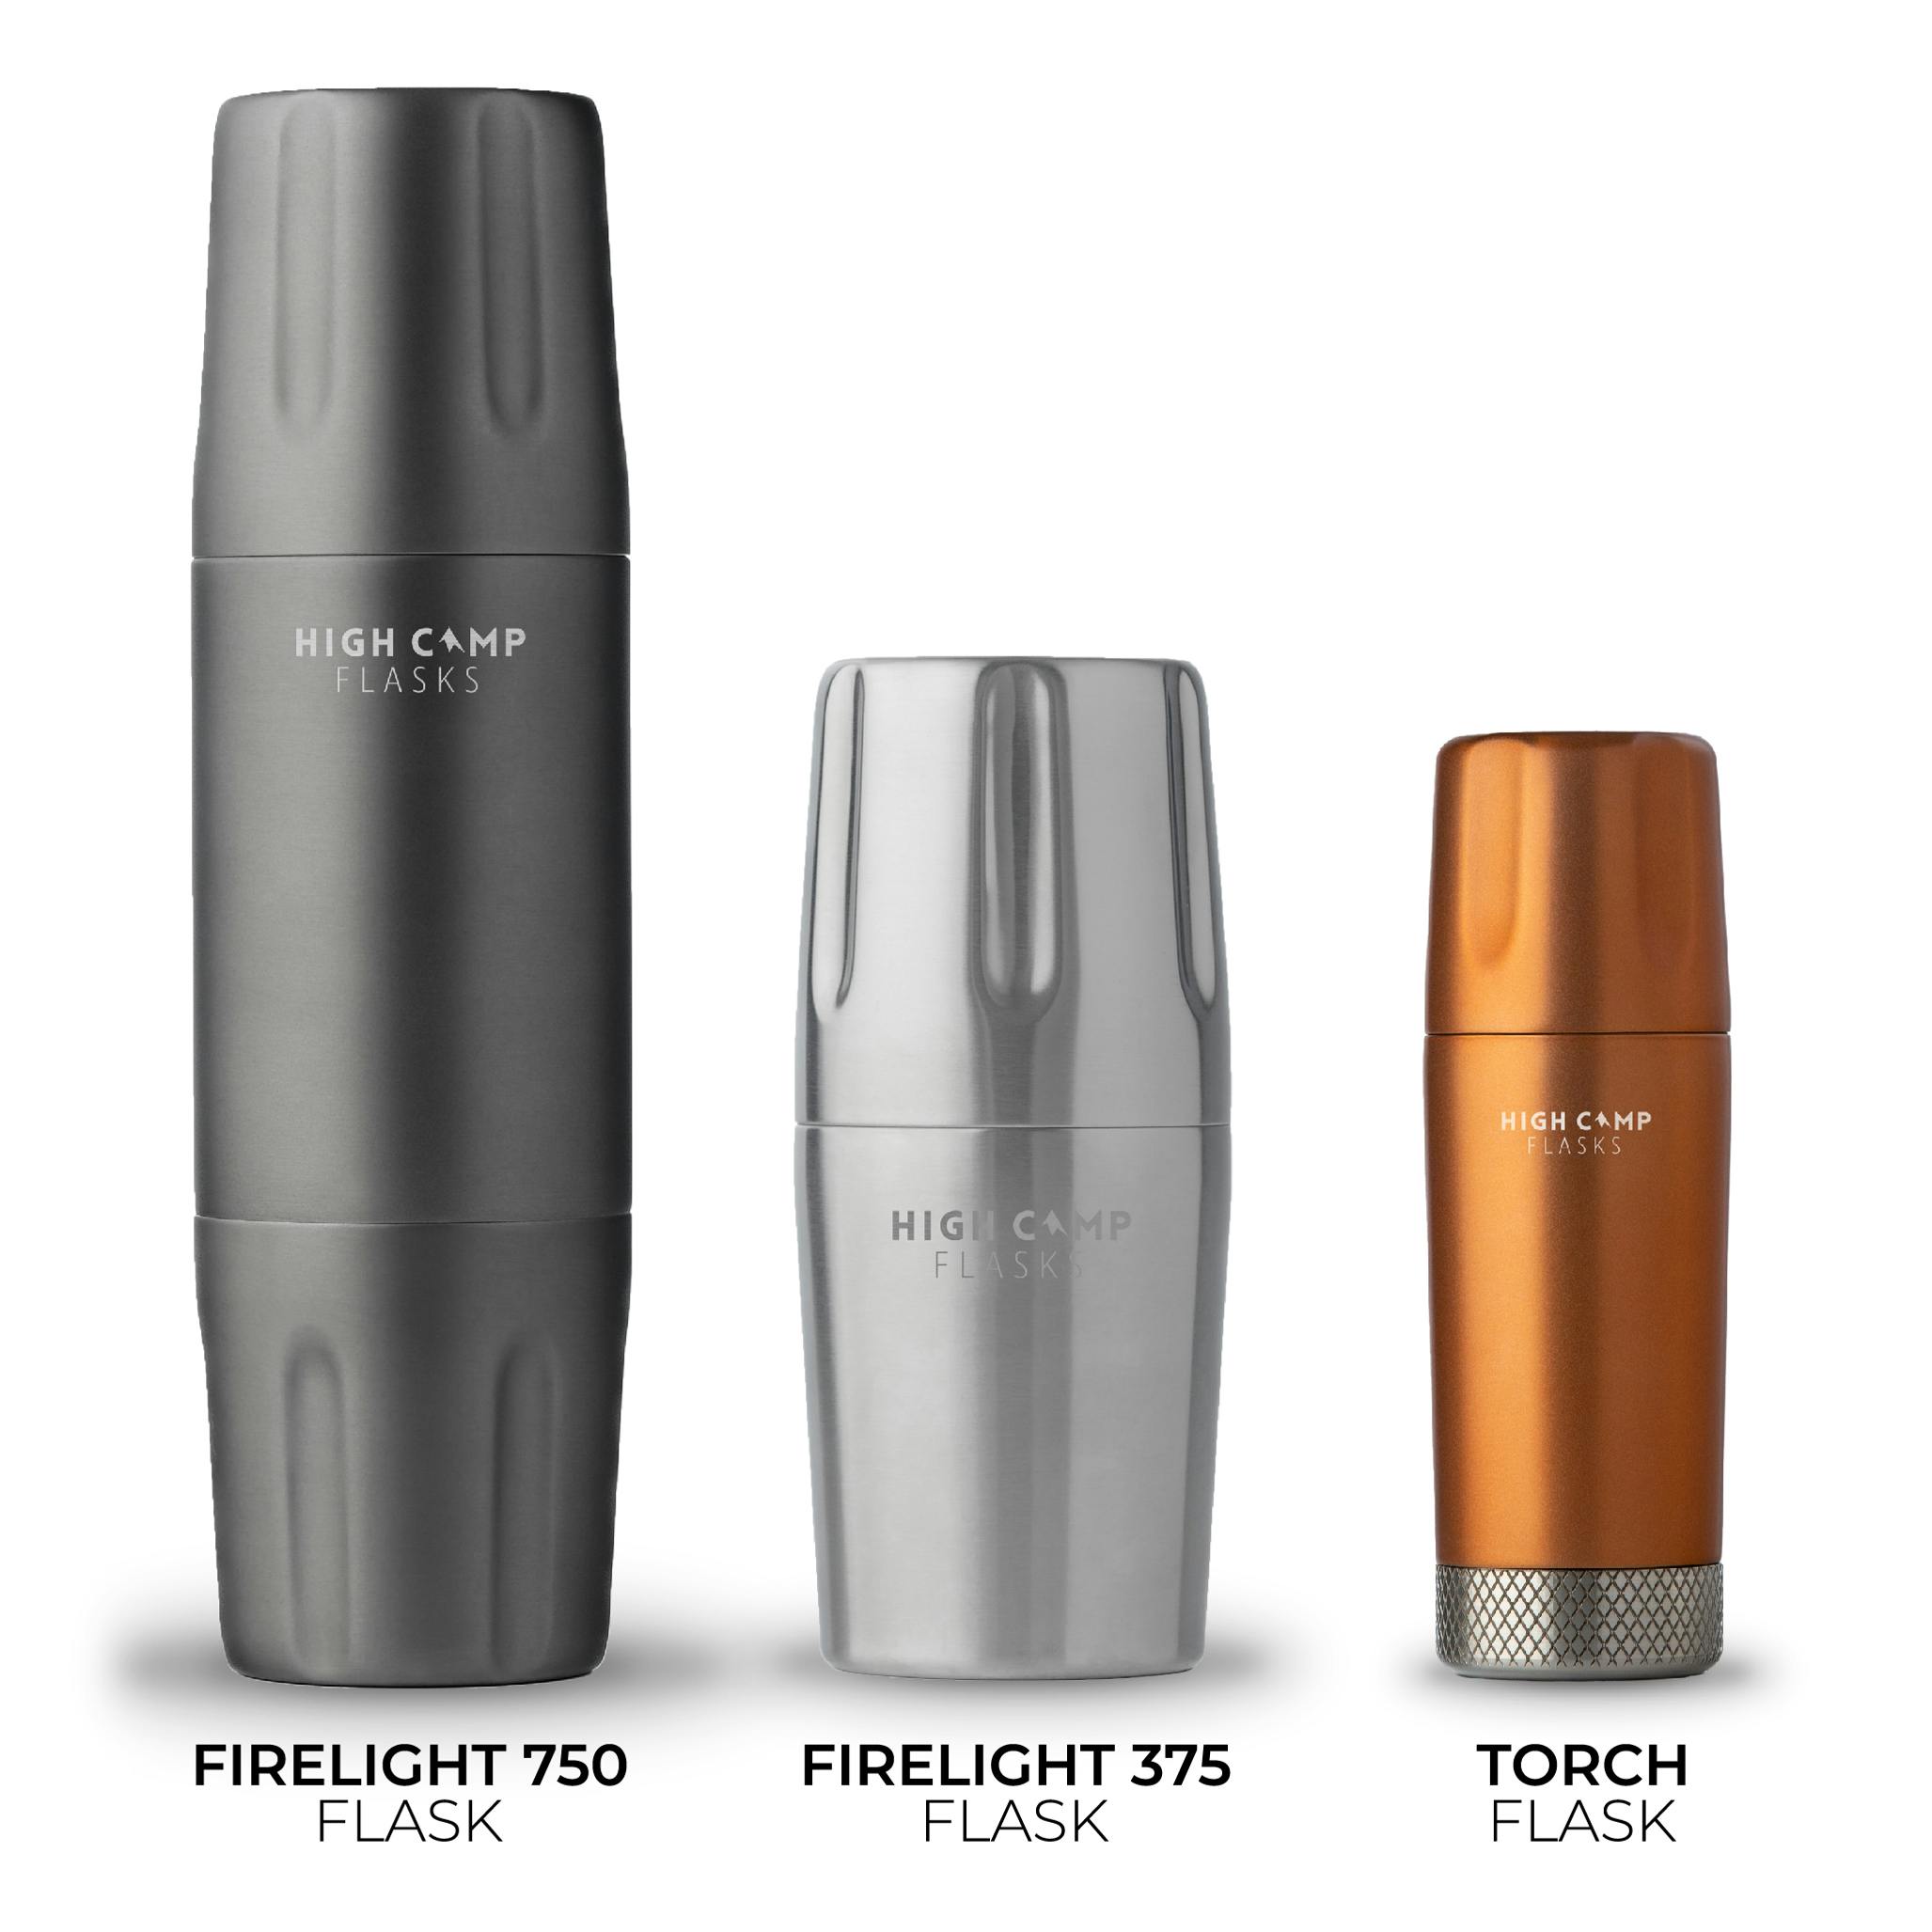 High Camp's Firelight Flask is Perfect for Two